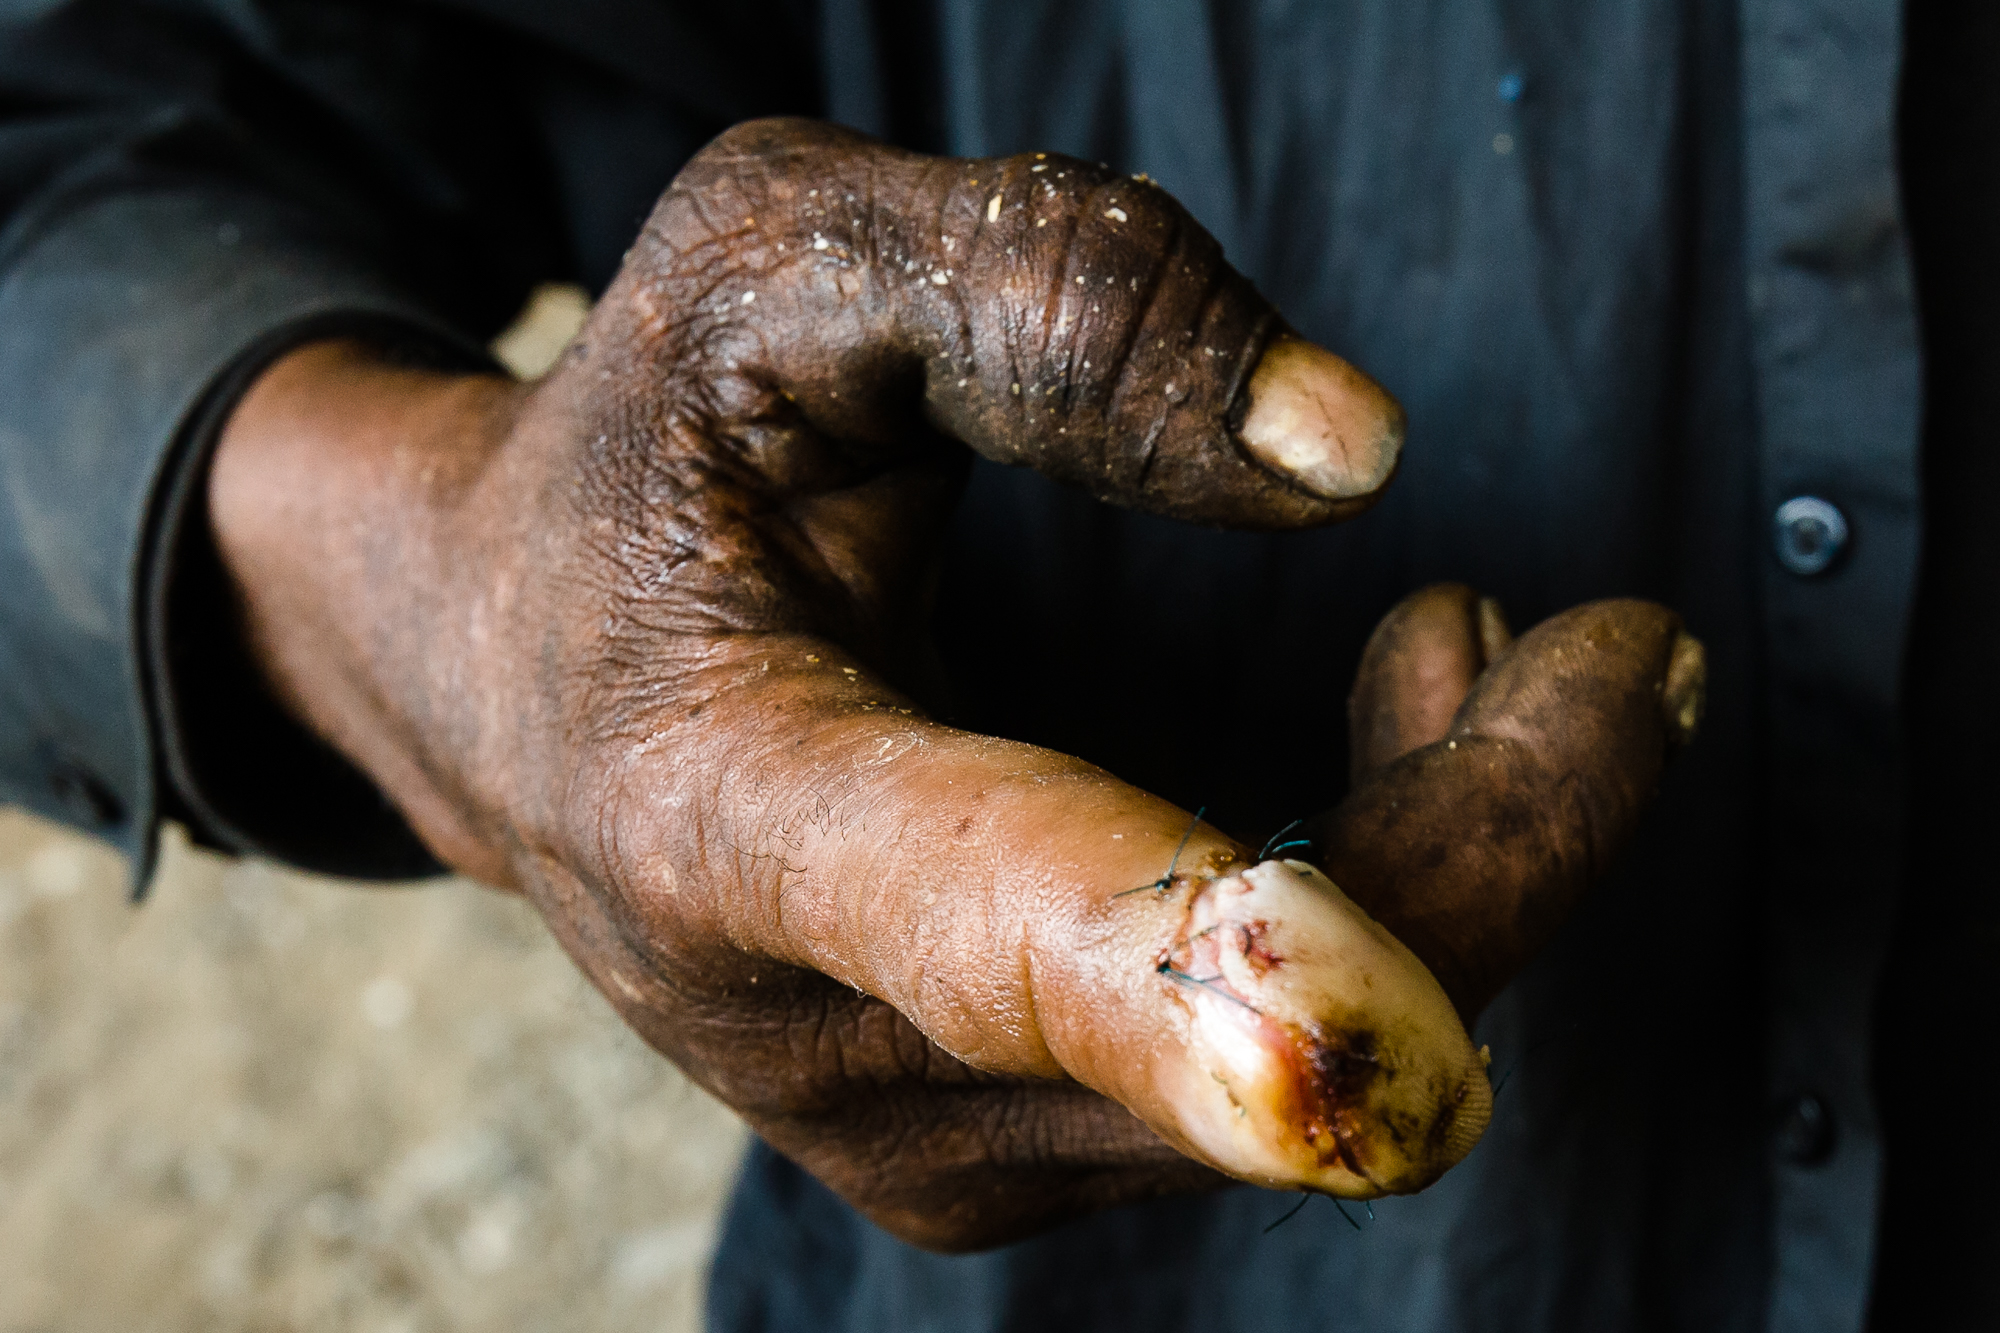  During a scrapping job in an abandoned factory, Boudreaux's finger was chopped off below the first joint. He was taken to the County hospital, where the surgeon did a hackneyed job of repairing his finger. Often is the case for the homeless at a cou